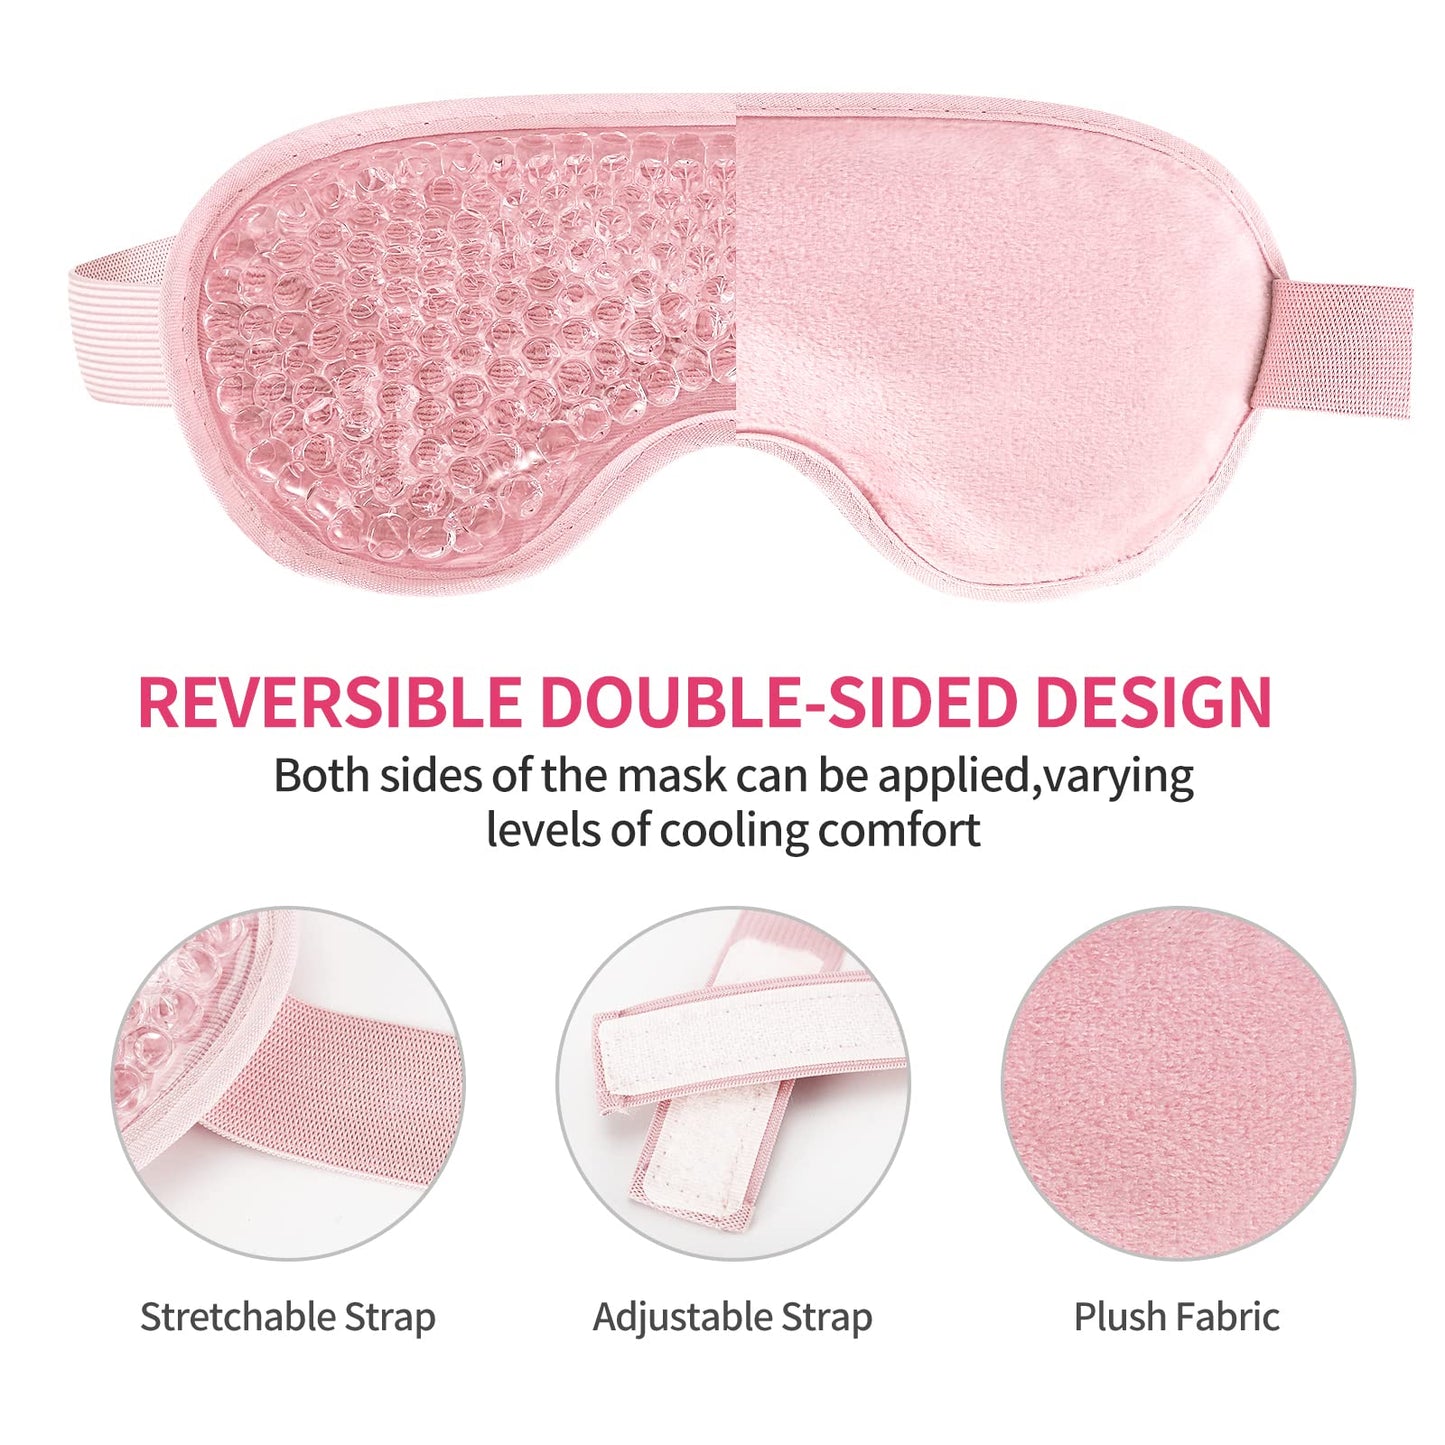 2PCS Gel Eye Mask Reusable Hot Cold Therapy Gel Bead Eye Mask for Puffiness /Dark Circles/Eye Bags /Dry Eyes/Headaches/Migraines/Stress Relief, Cooling Eye Mask Hot/Cold Compress Eye Mask (Pink)